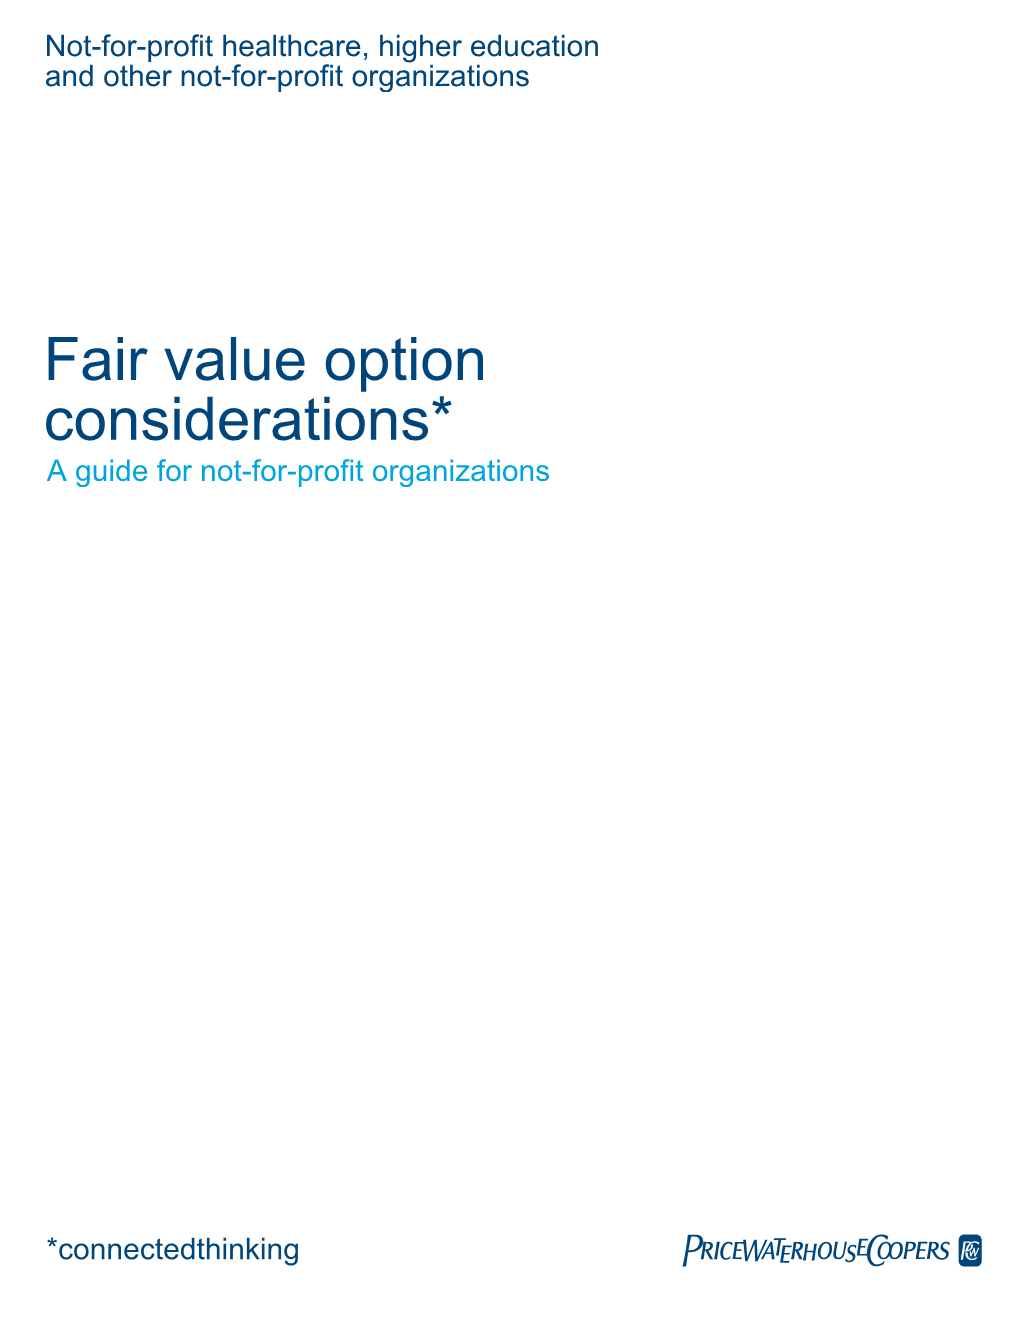 Fair Value Option Considerations* a Guide for Not-For-Profit Organizations